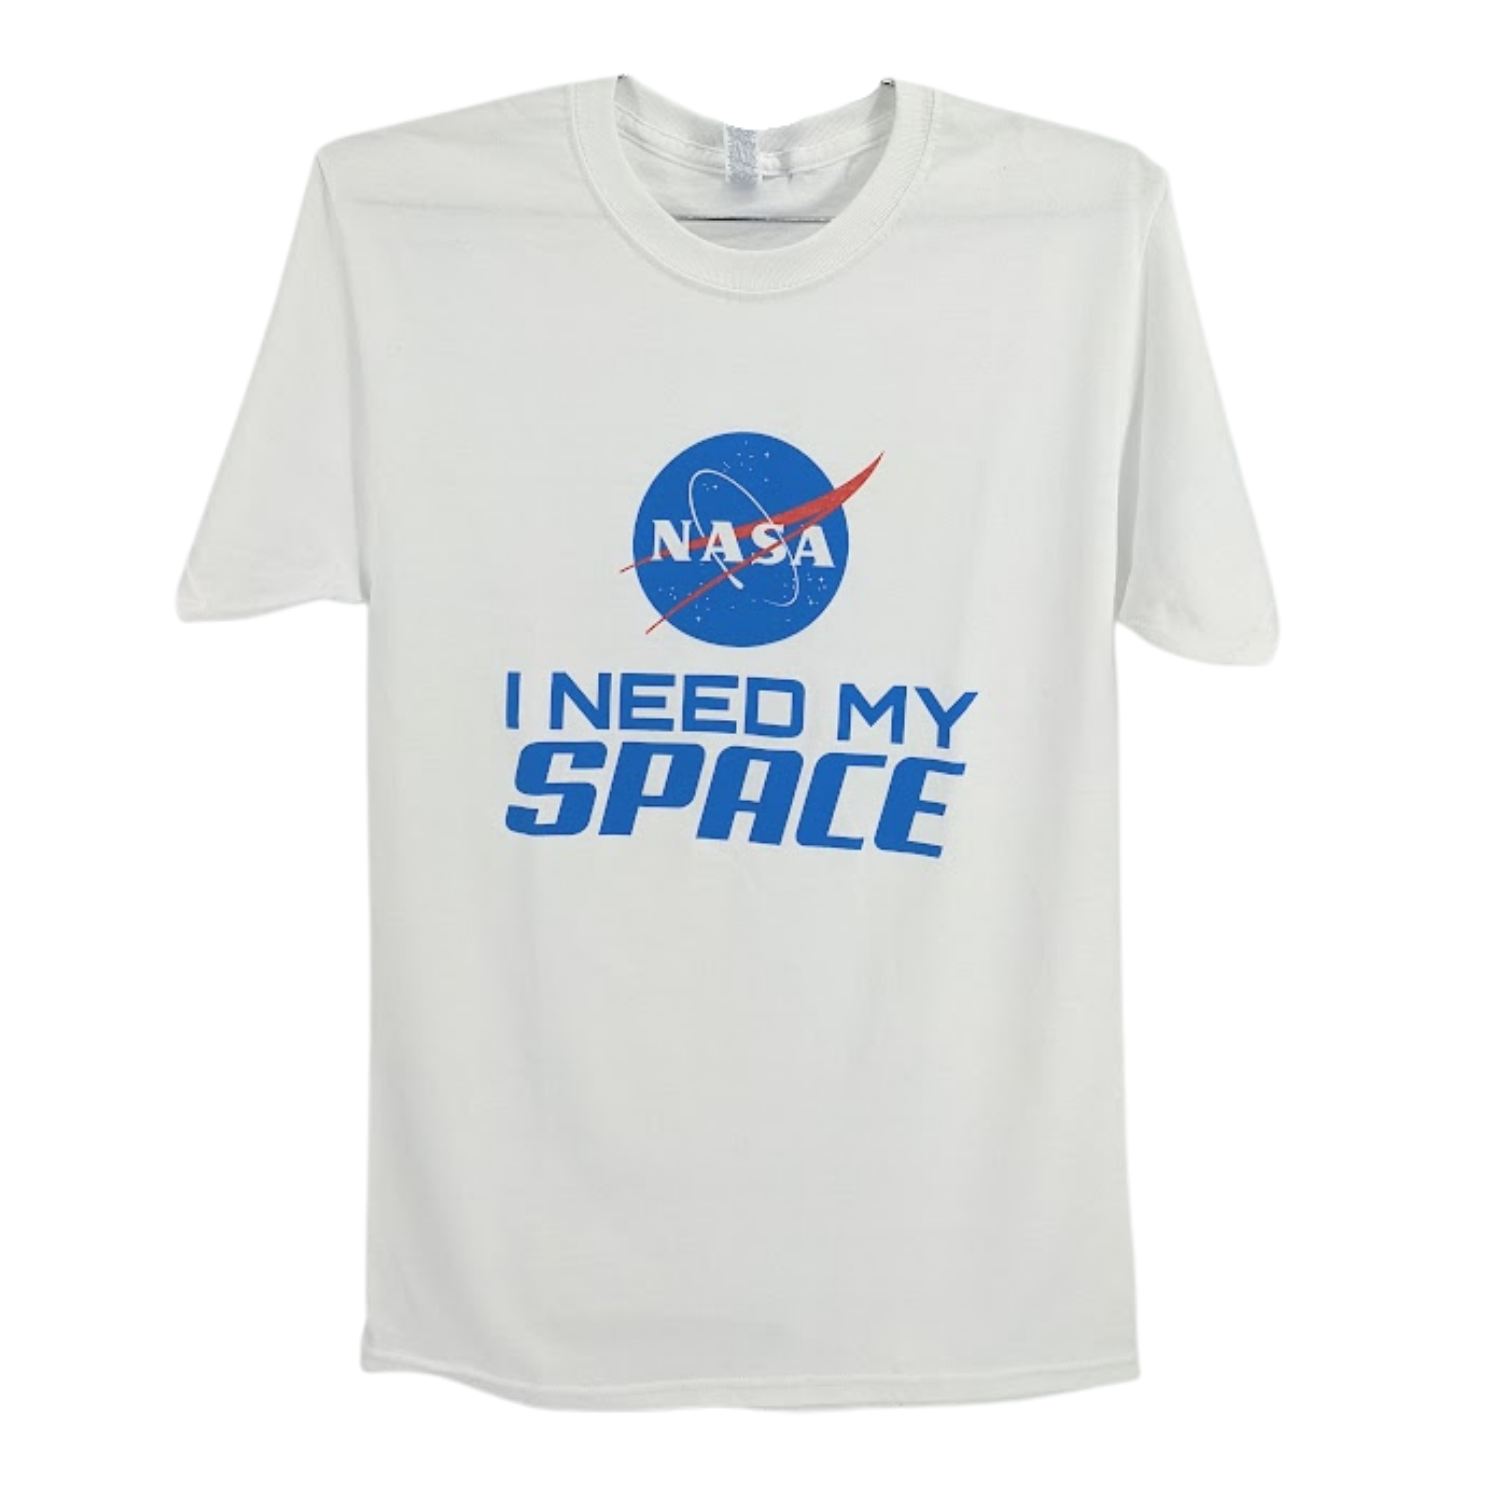 I Need My Space T-shirt (Adult)